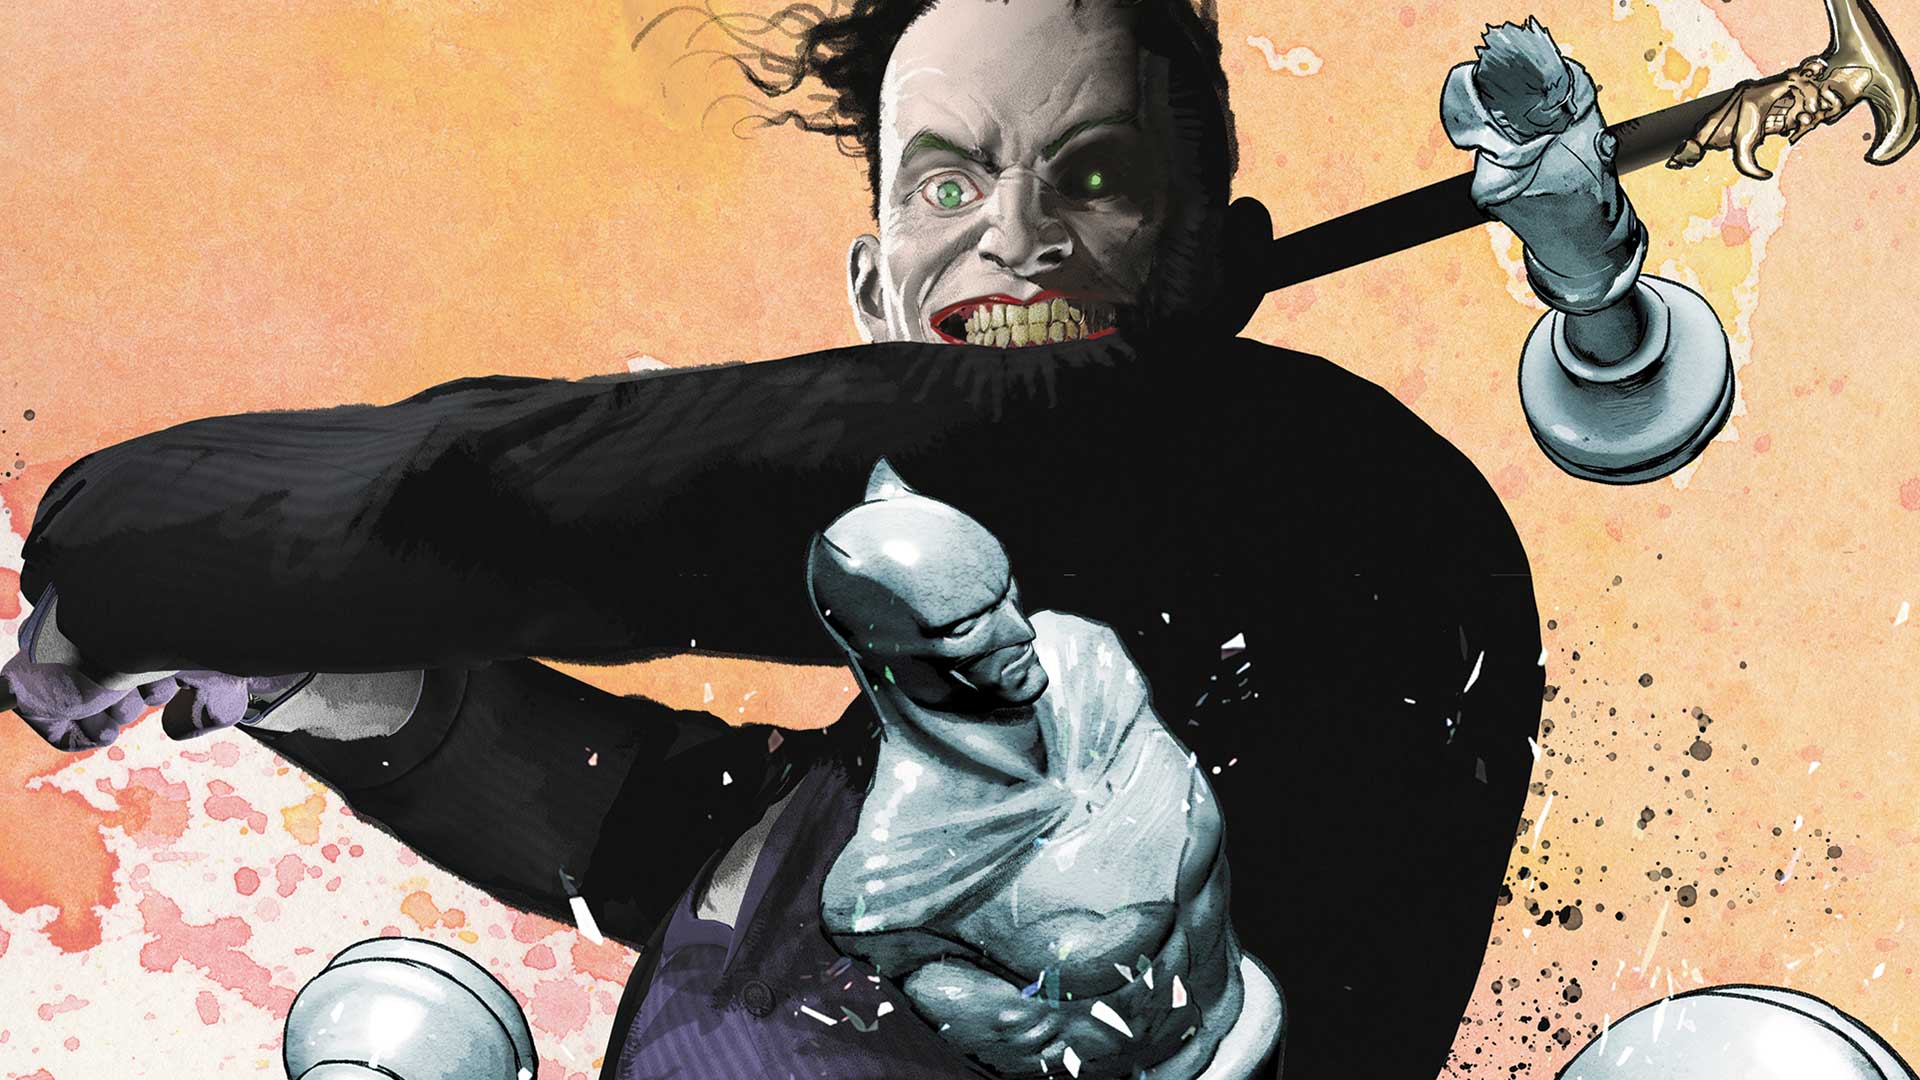 Batman #48 review: One of the weirdest Batman and Joker battles in recent memory. Just not in the way you think